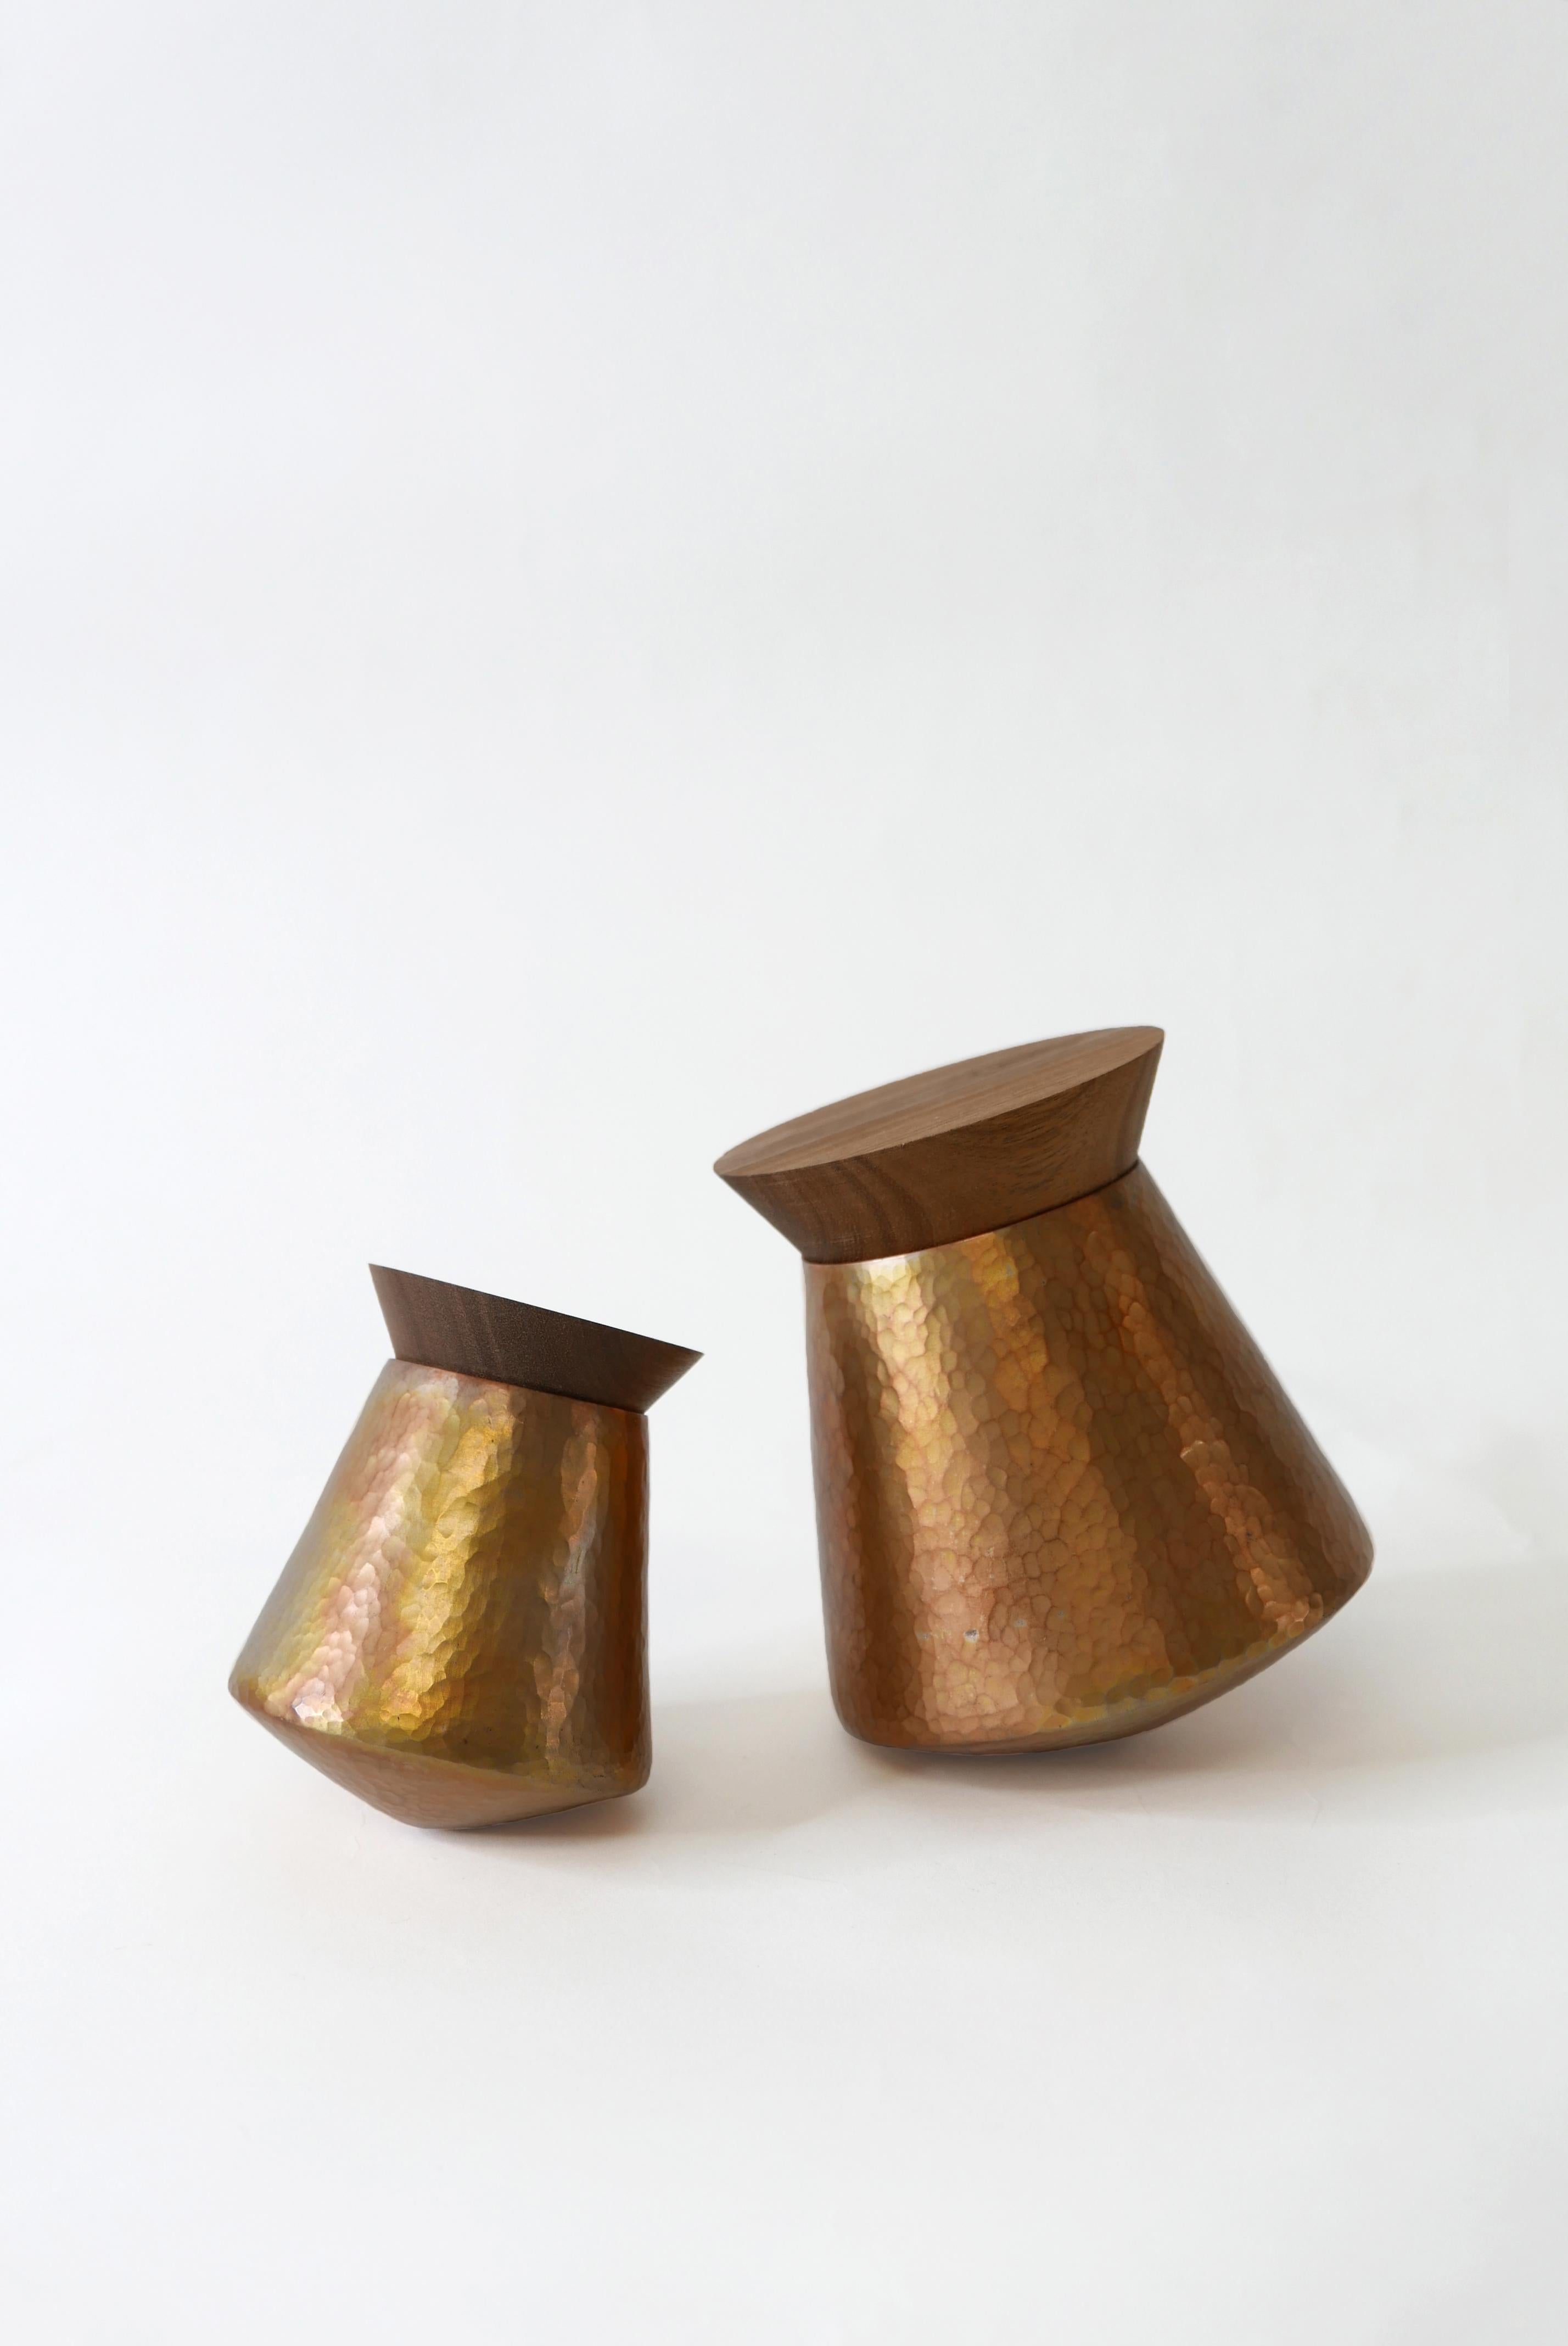 Contemporary Set of Hammered Copper Containers with Brass Finish and Rosamorada Wood Lid For Sale